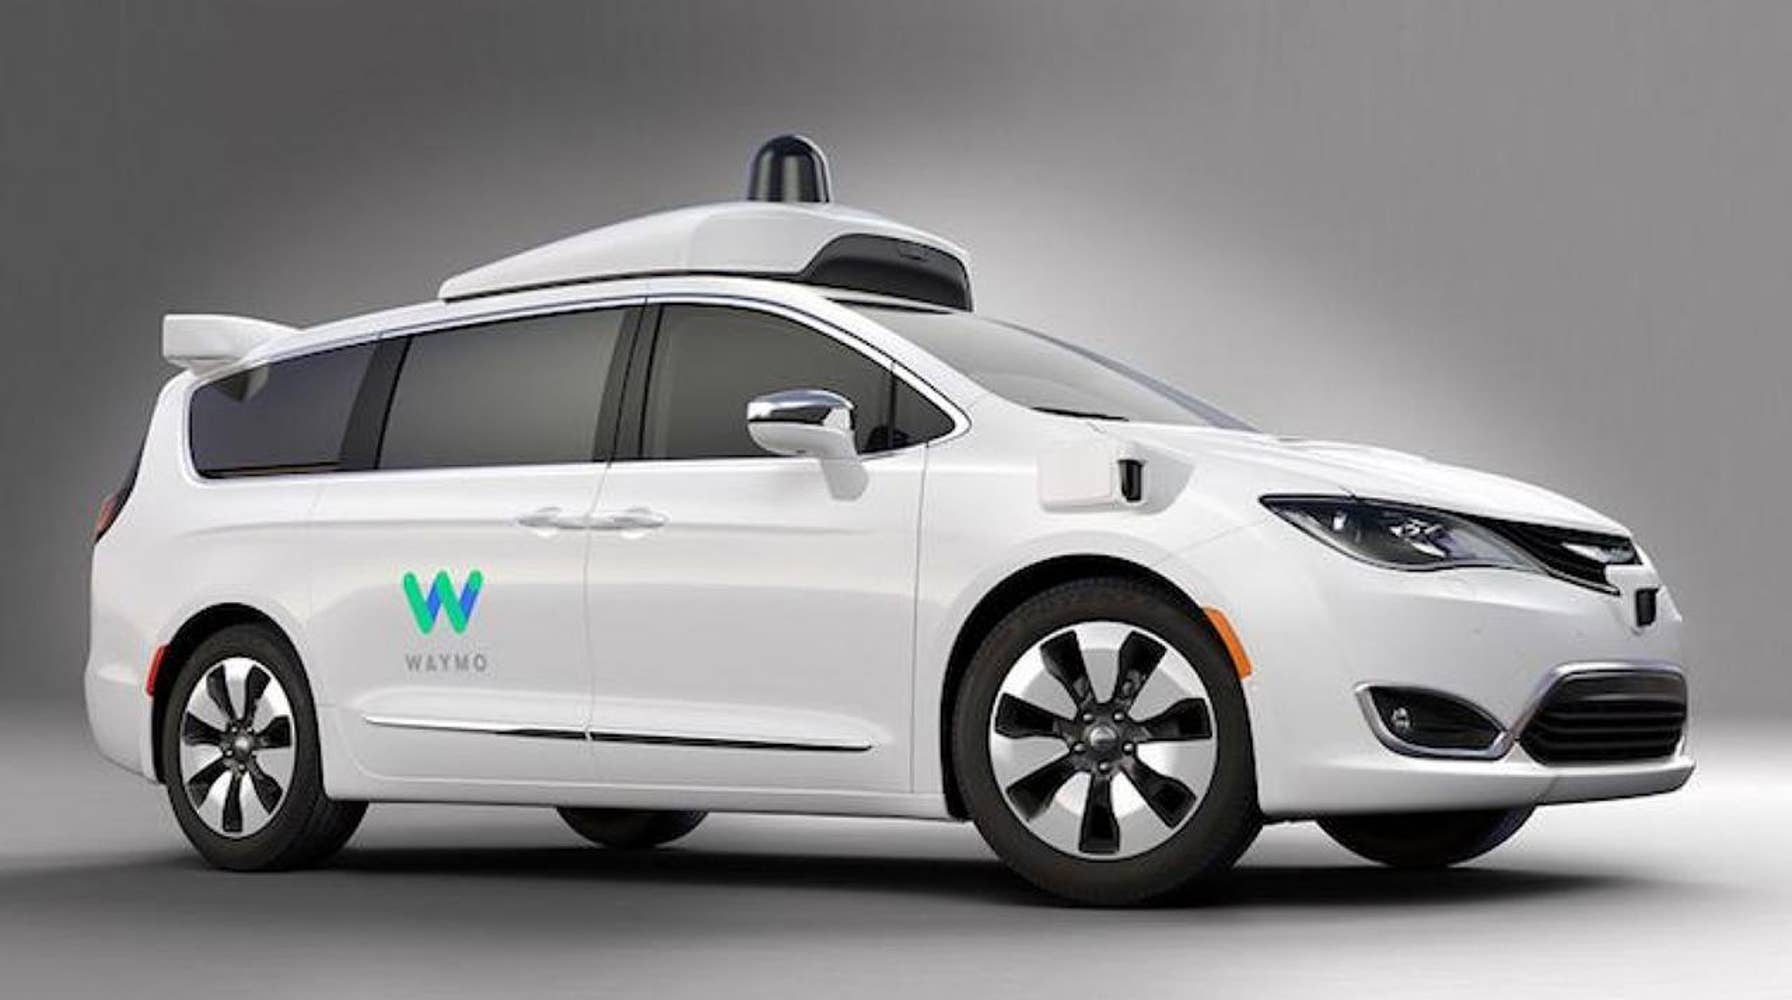 Self-Driving Cars: Waymo's Federal Investigation Sparks Industry Concerns